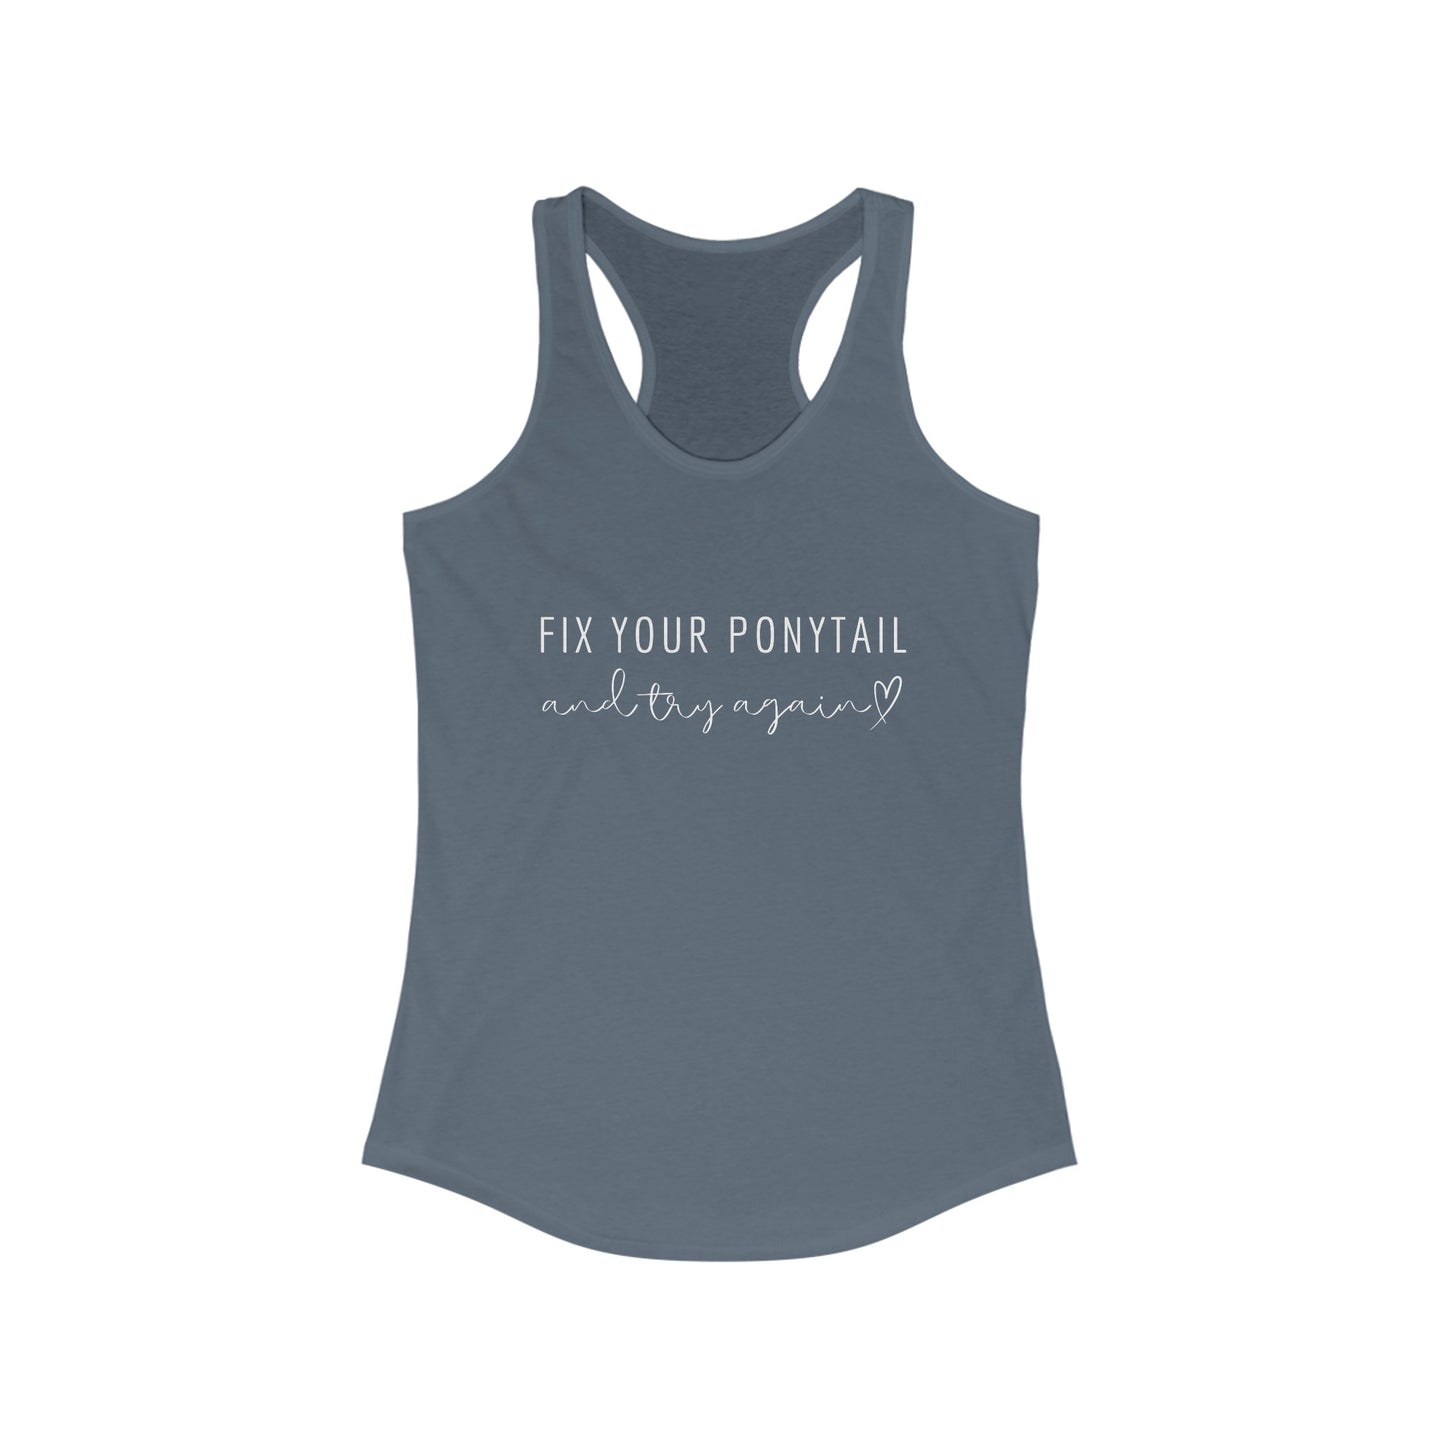 Fix your ponytail and try again - Tank Top